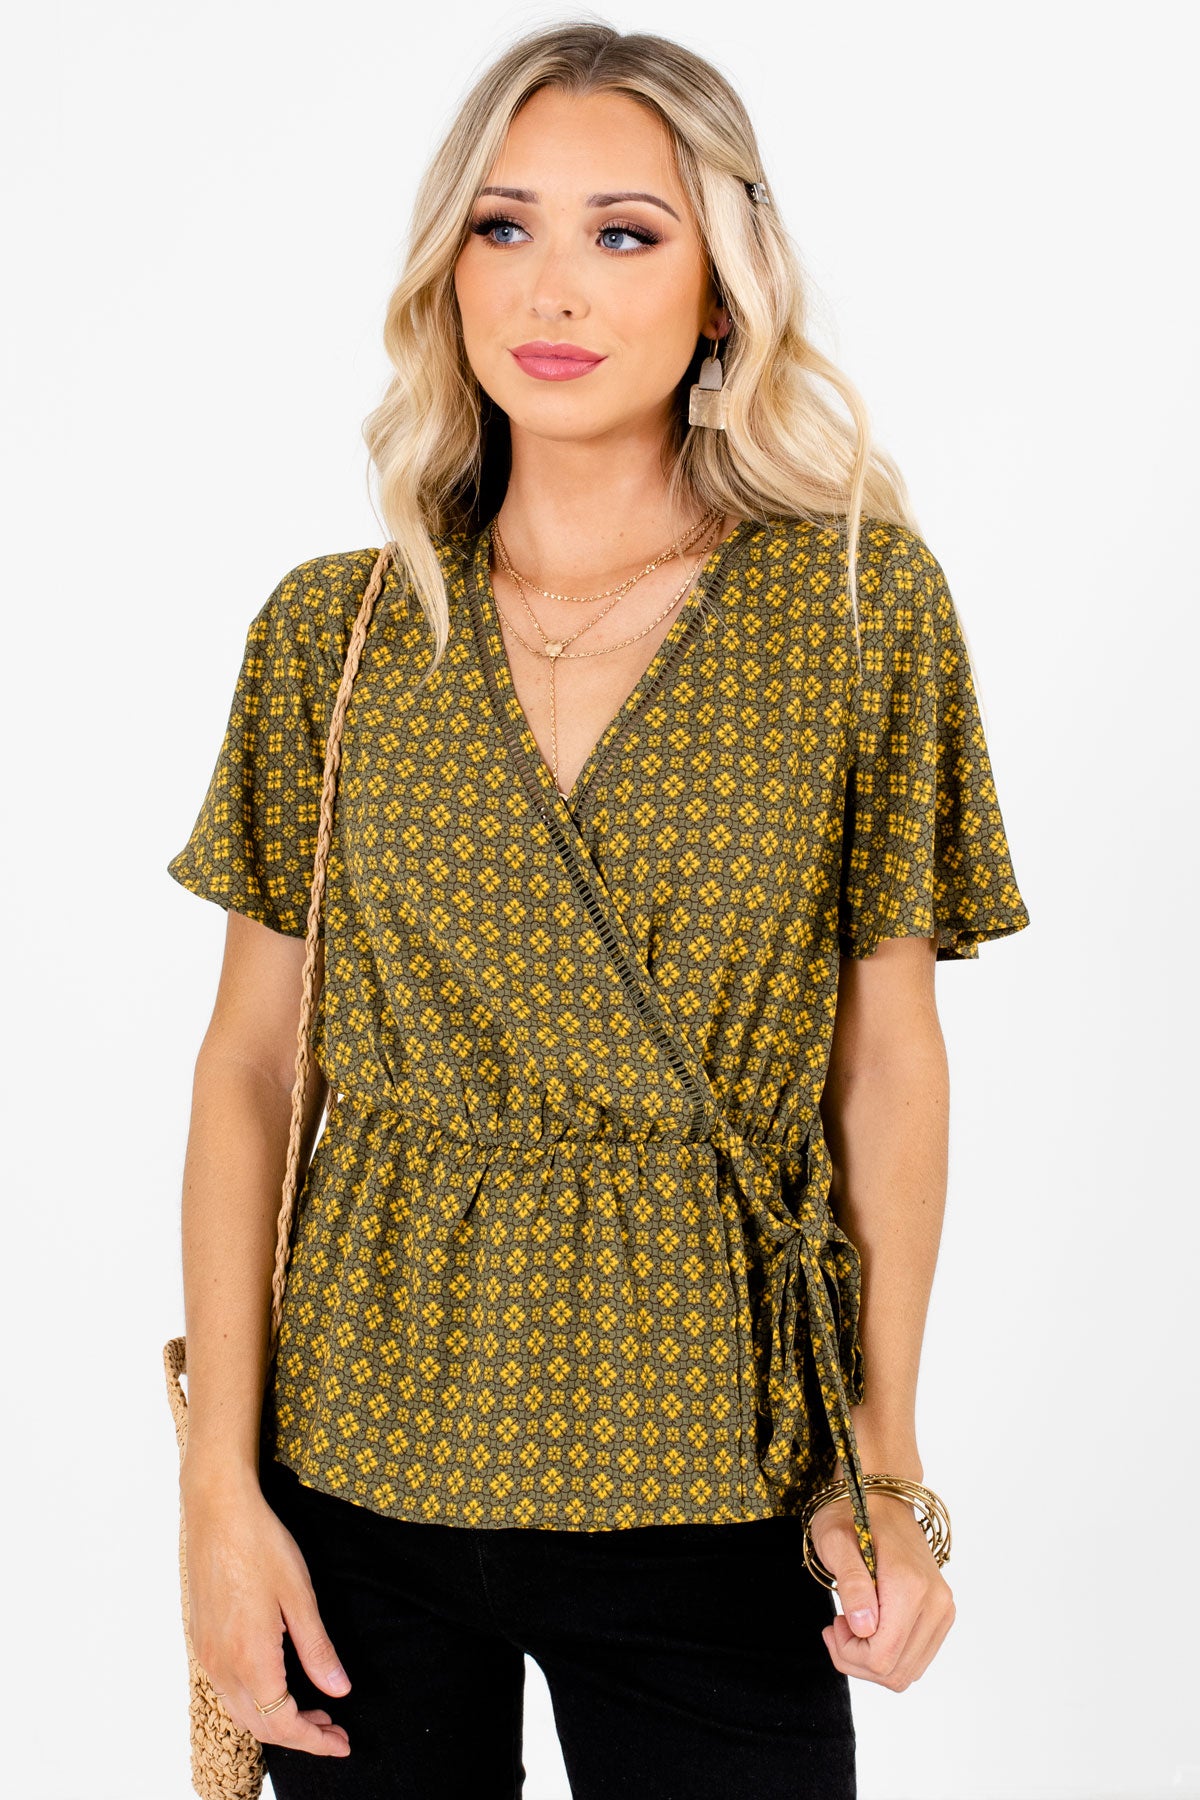 Olive Green Multicolored Patterned Boutique Blouses for Women